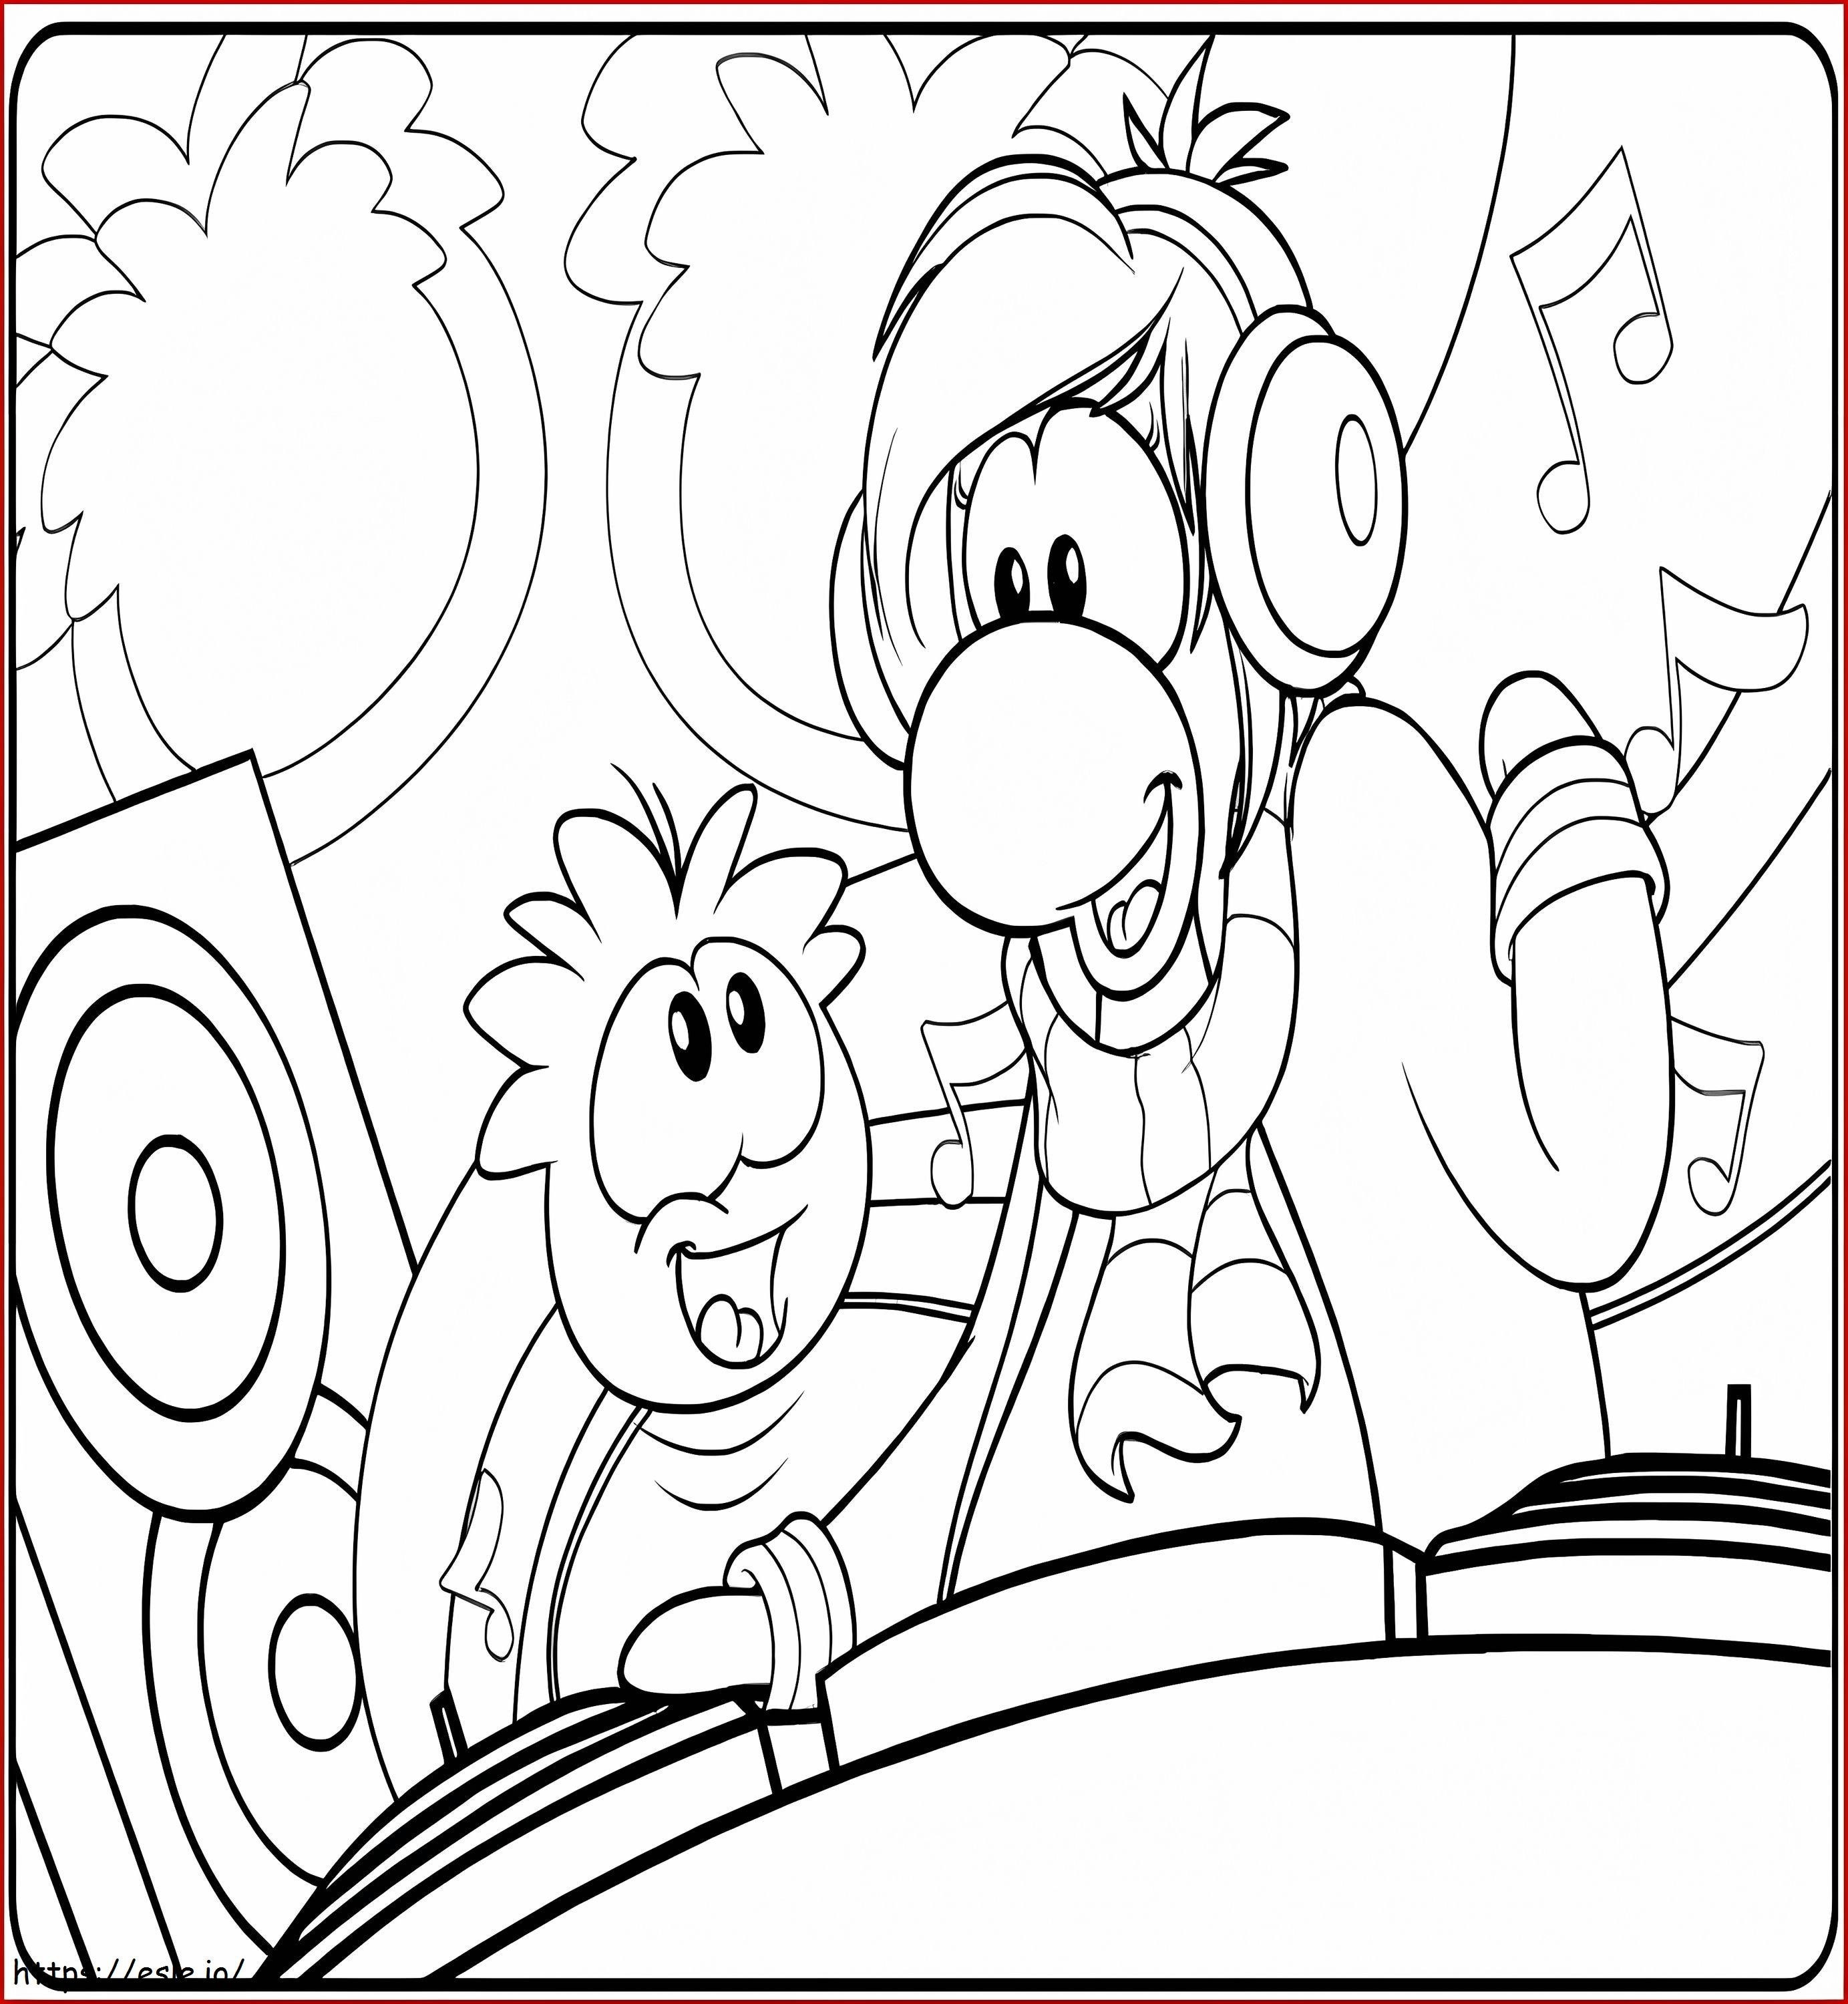 DJ Puffle coloring page